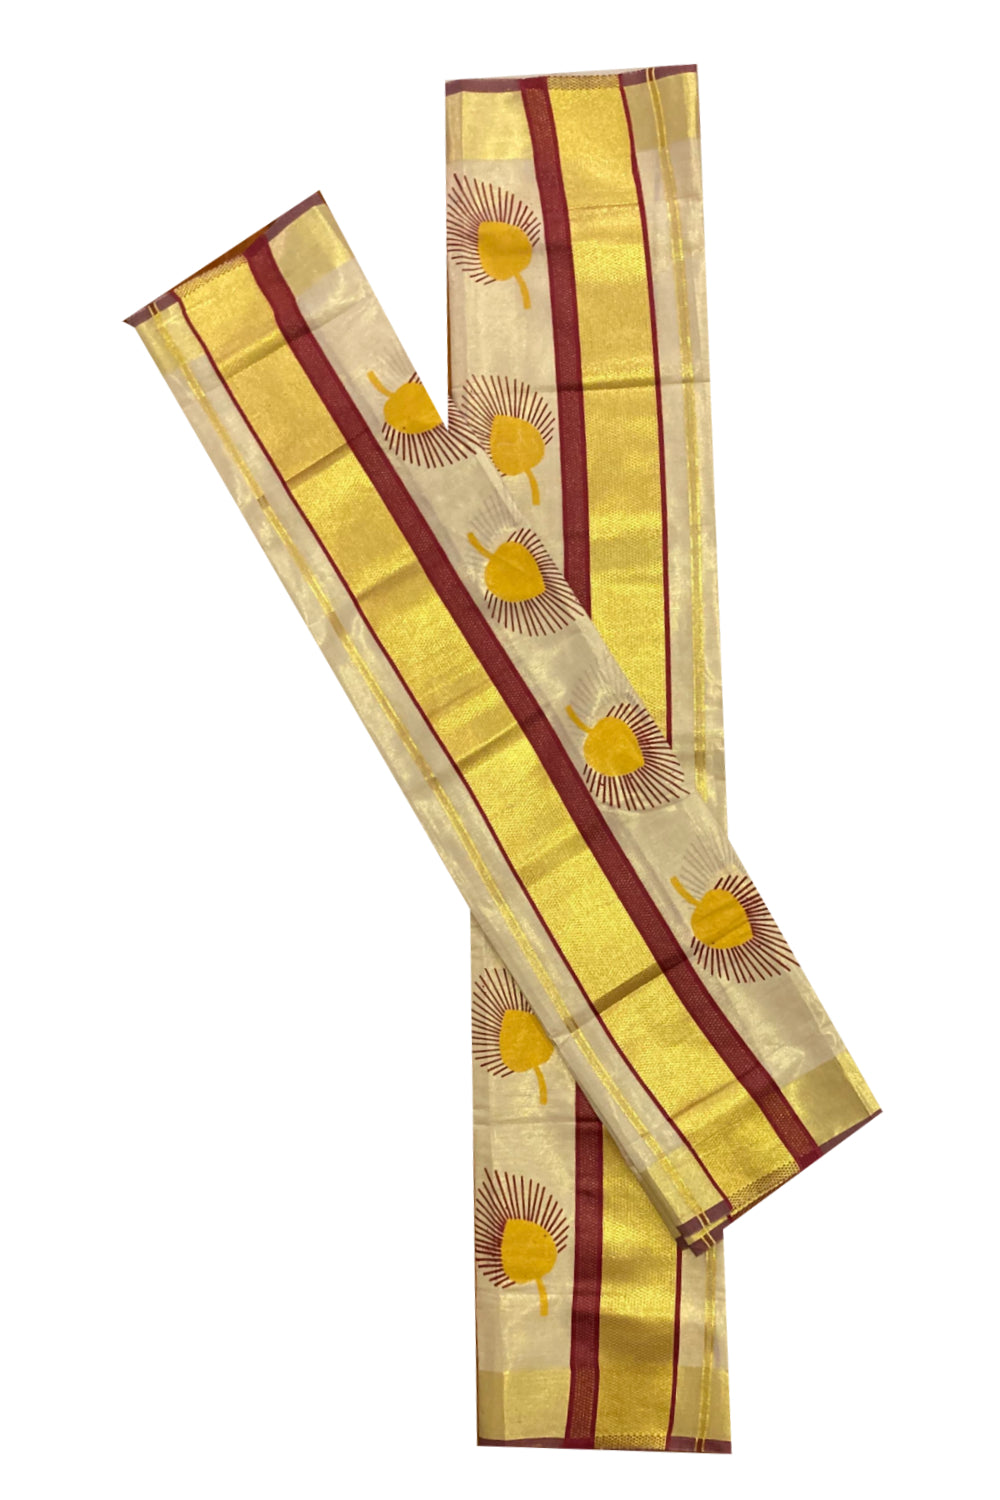 Tissue Set Mundu with Hand Block Printed Red and Yellow Design